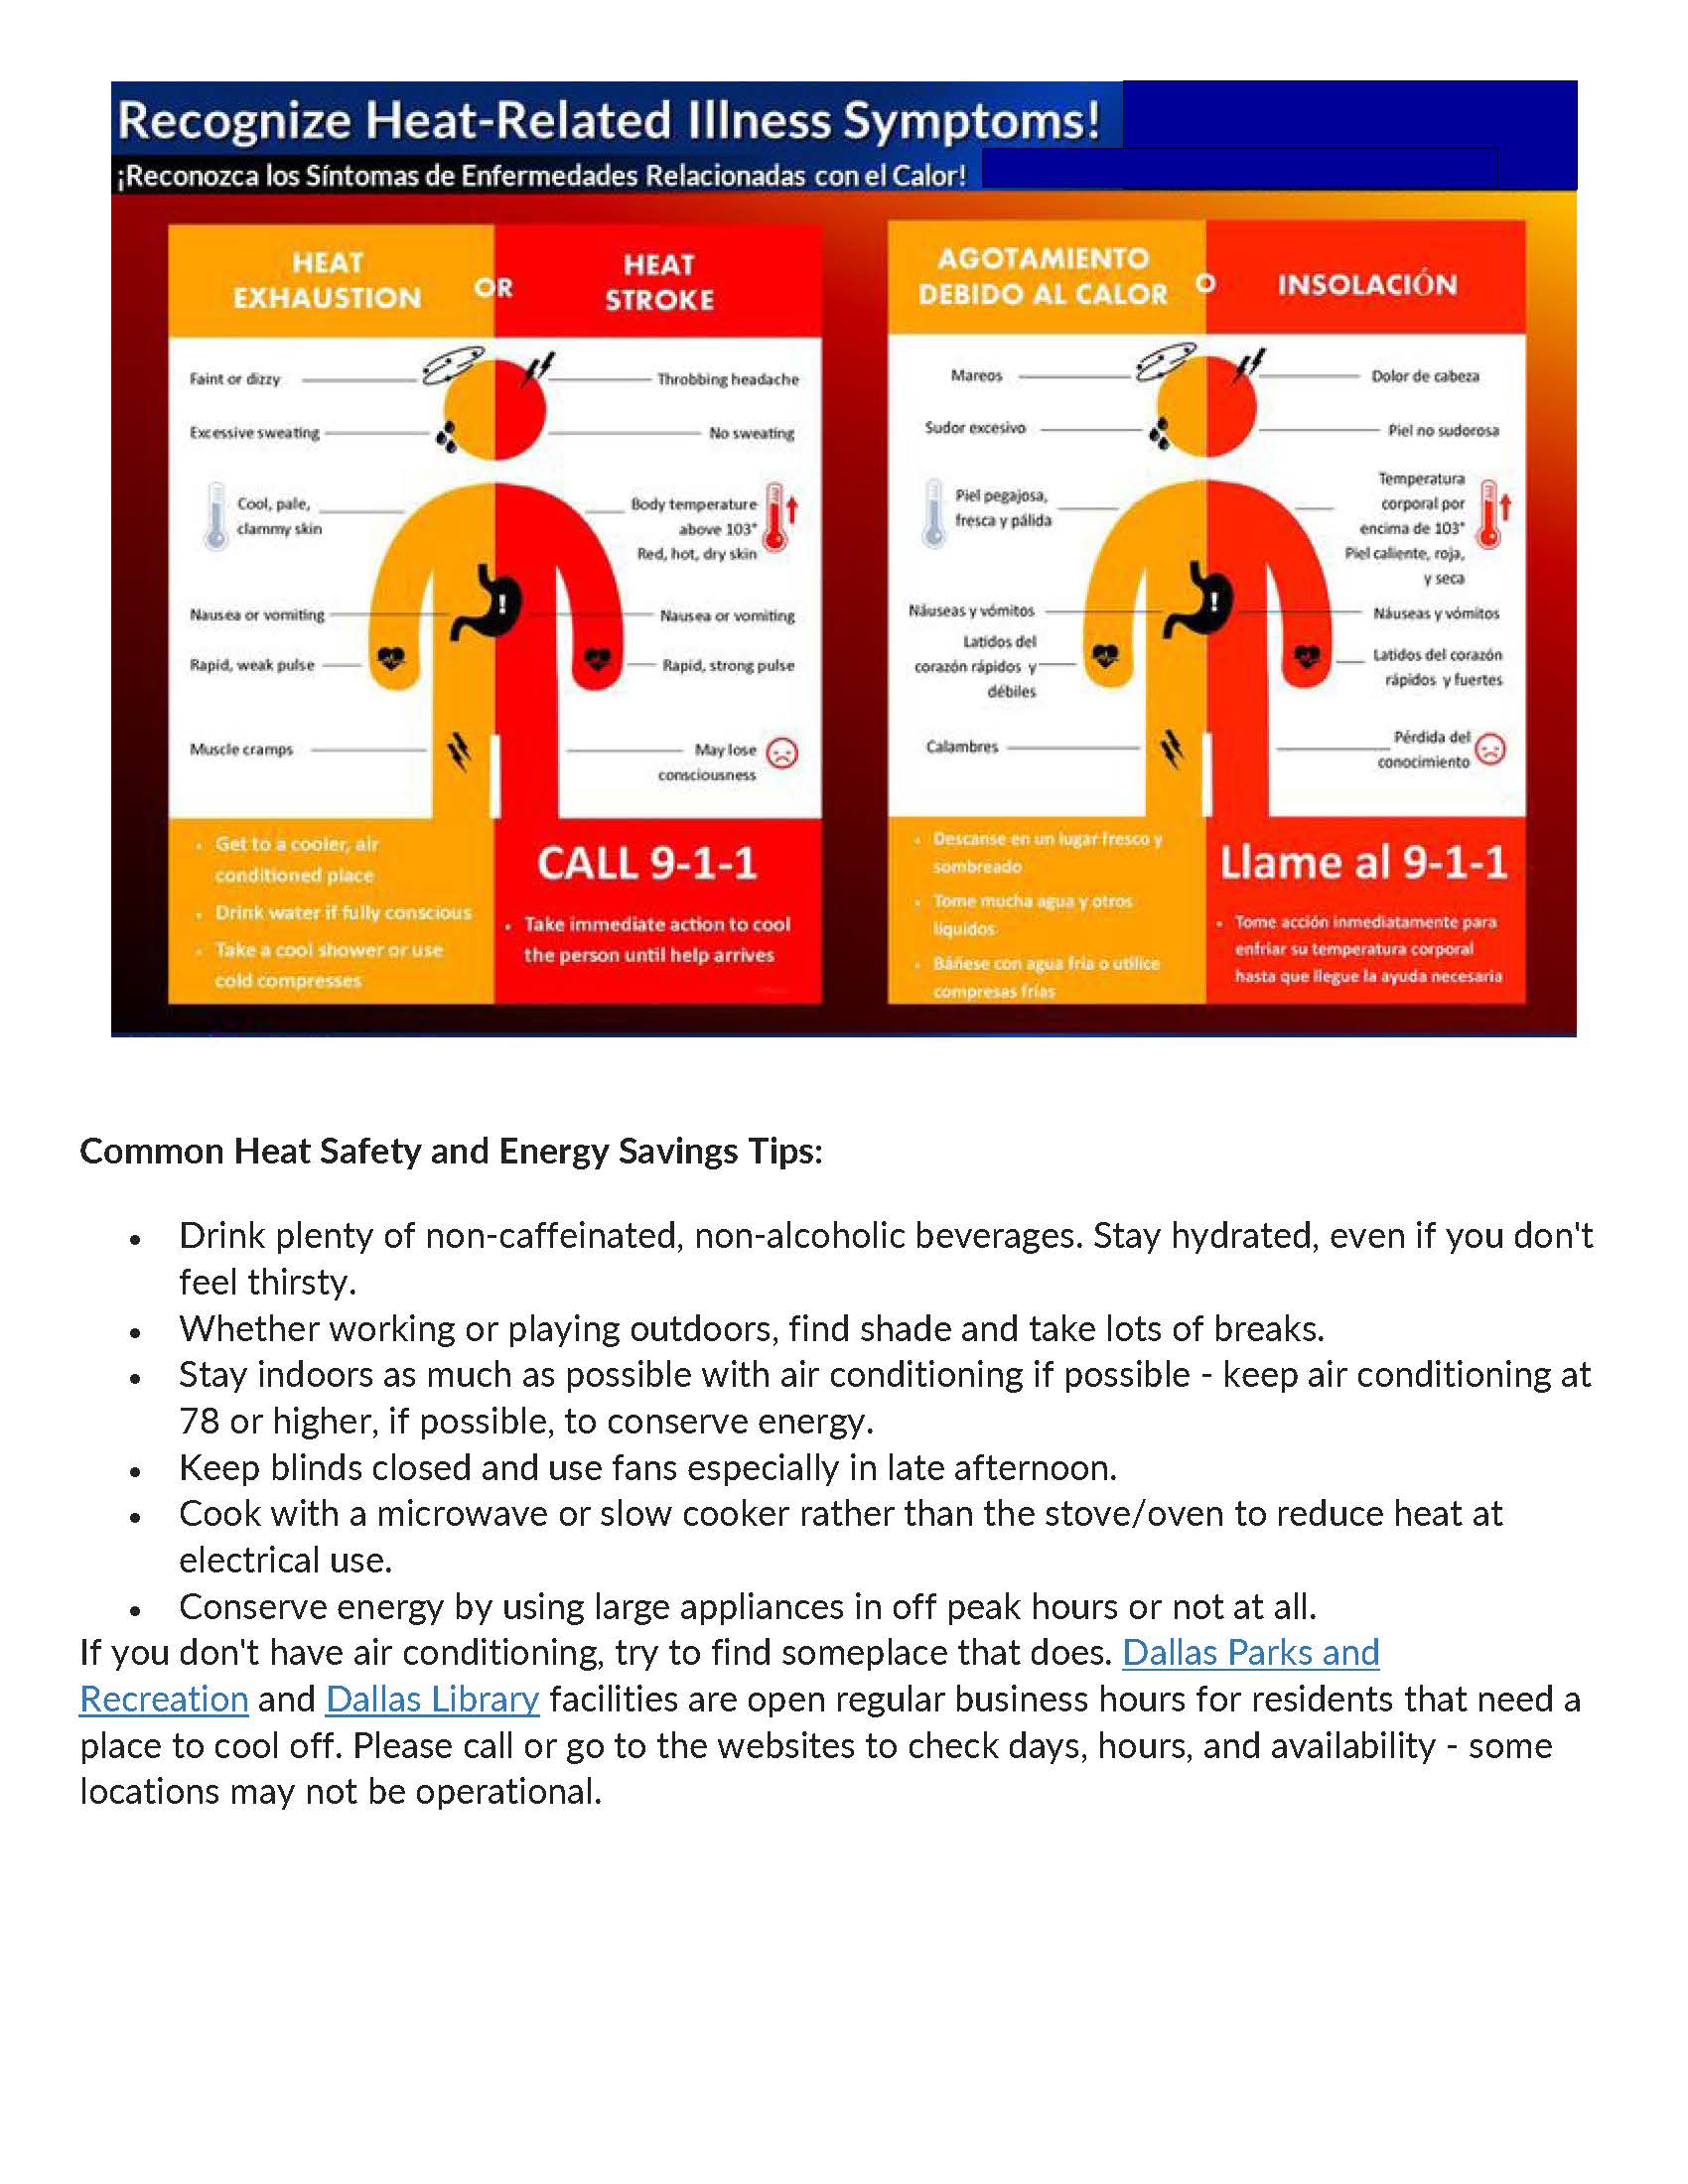 Common Heat Safety and Energy Savings.jpg